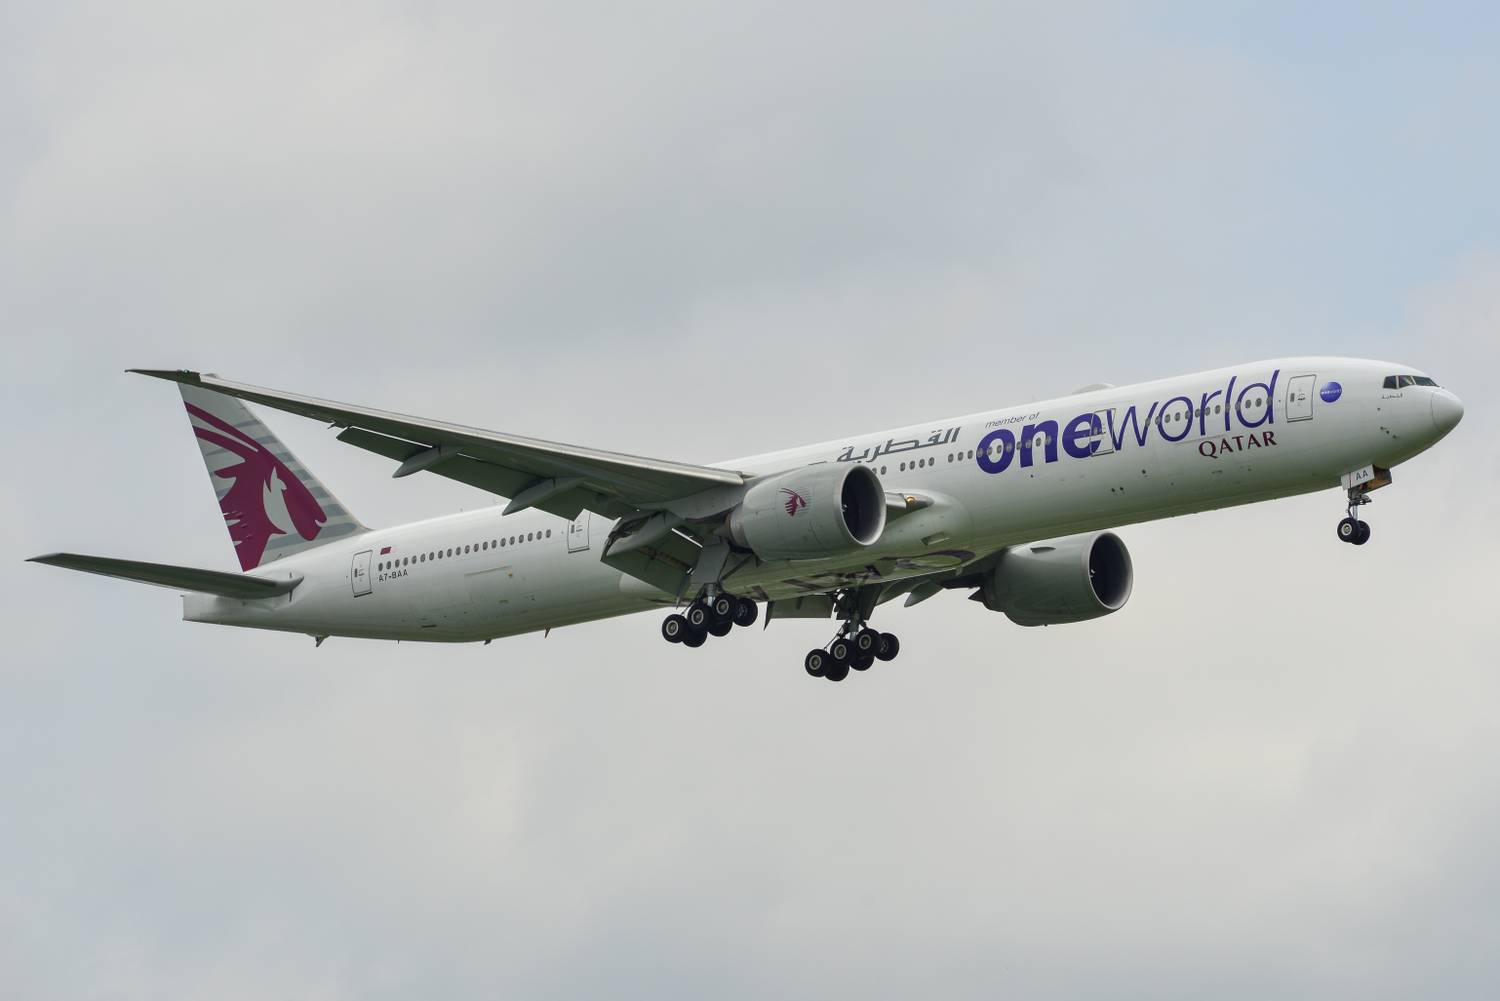 A Qatar Airways Boeing 777-300ER in oneworld Livery flying in the sky.